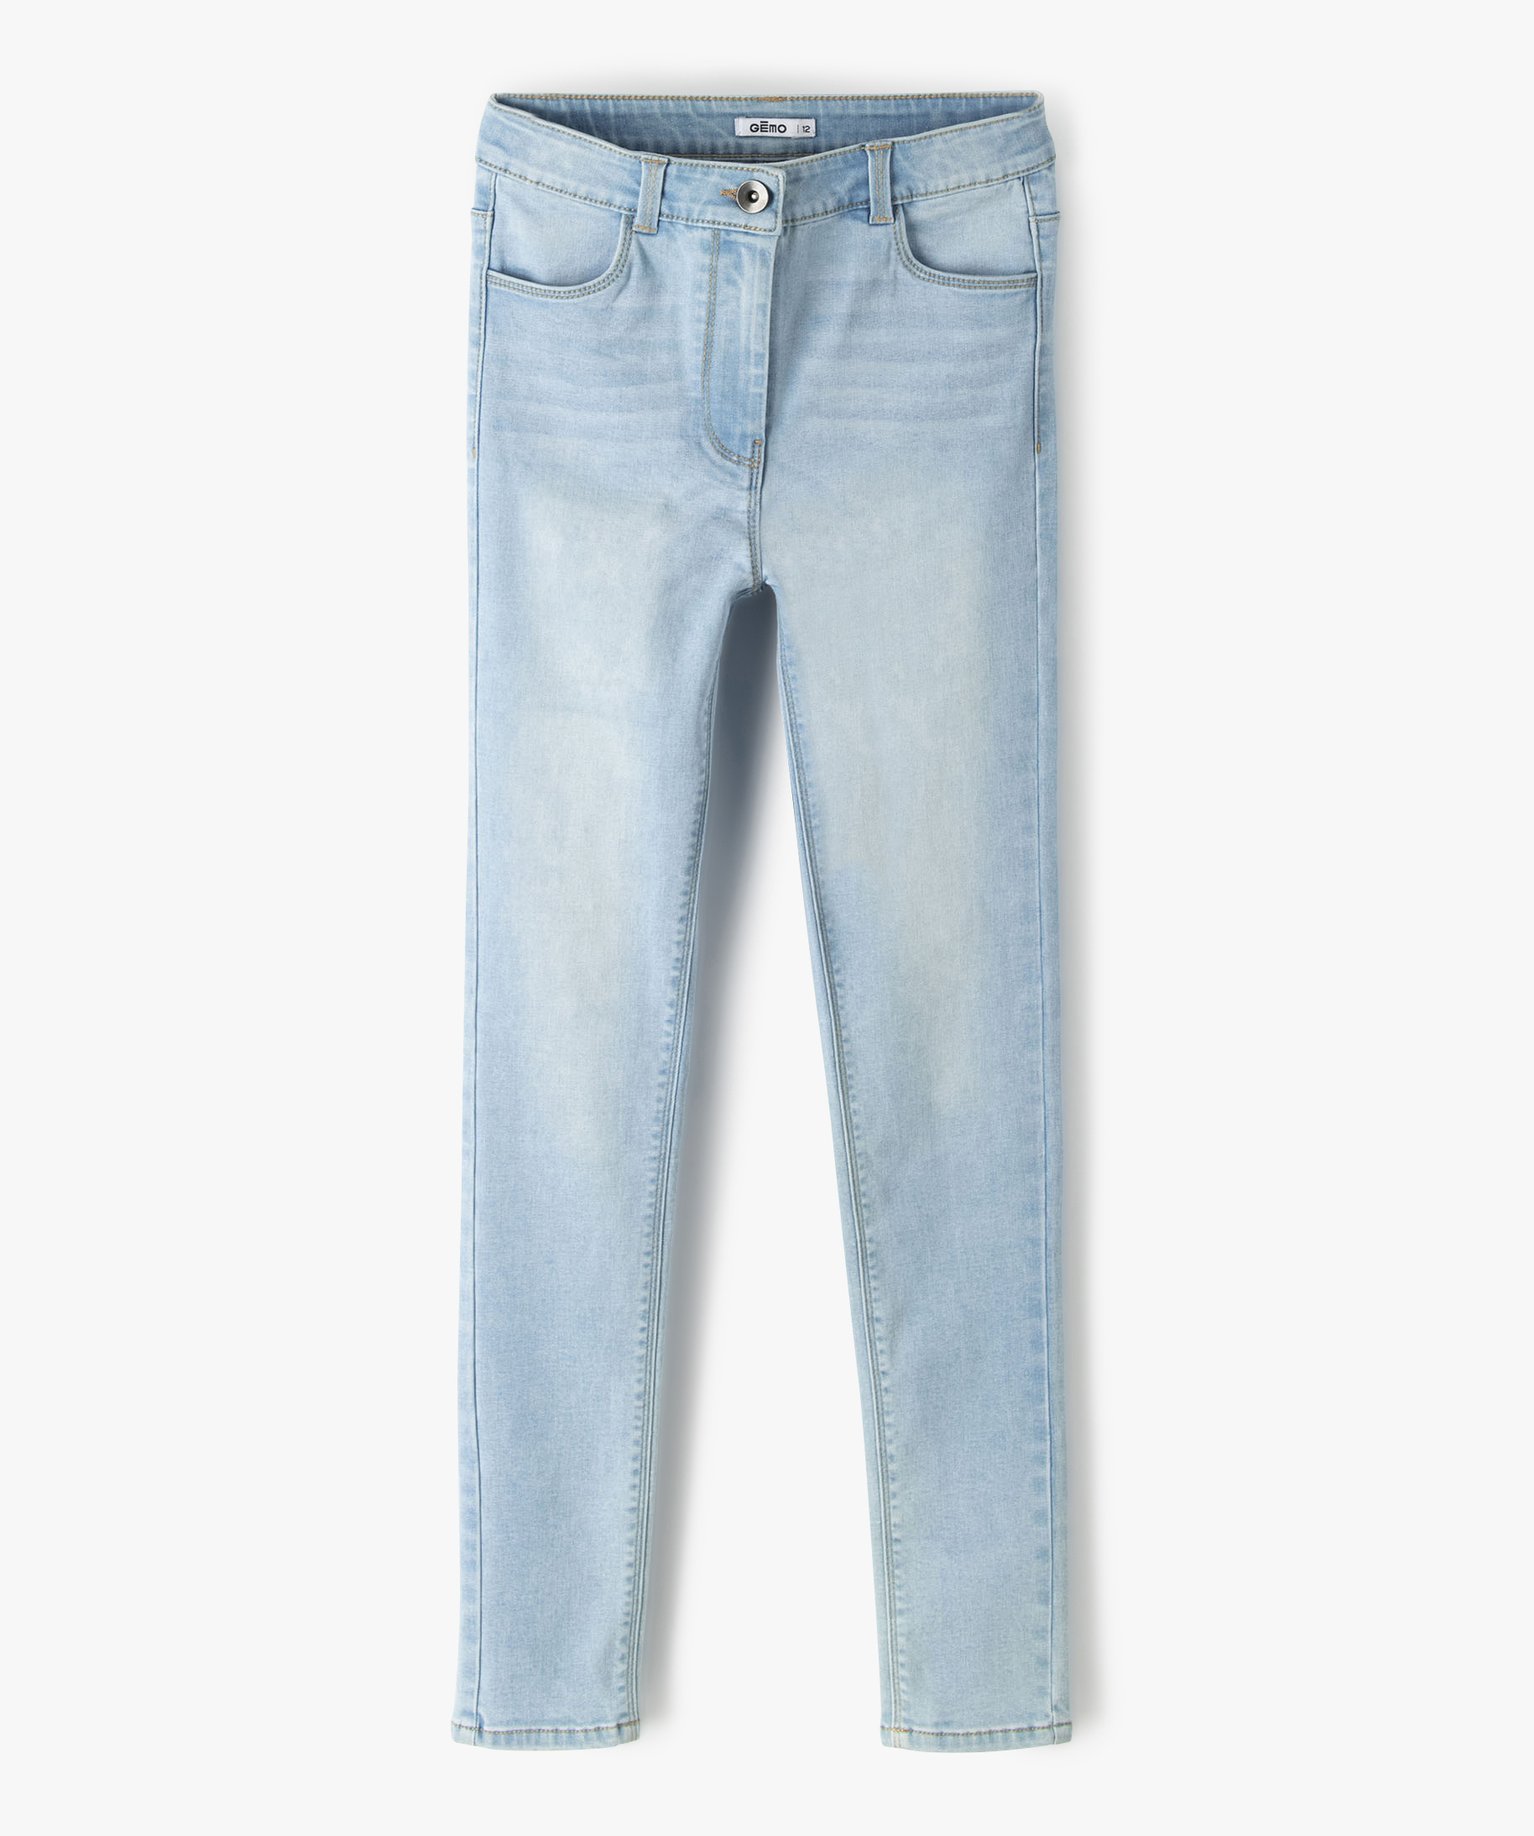 jean fille coupe ultra skinny 4 poches bleu jeans